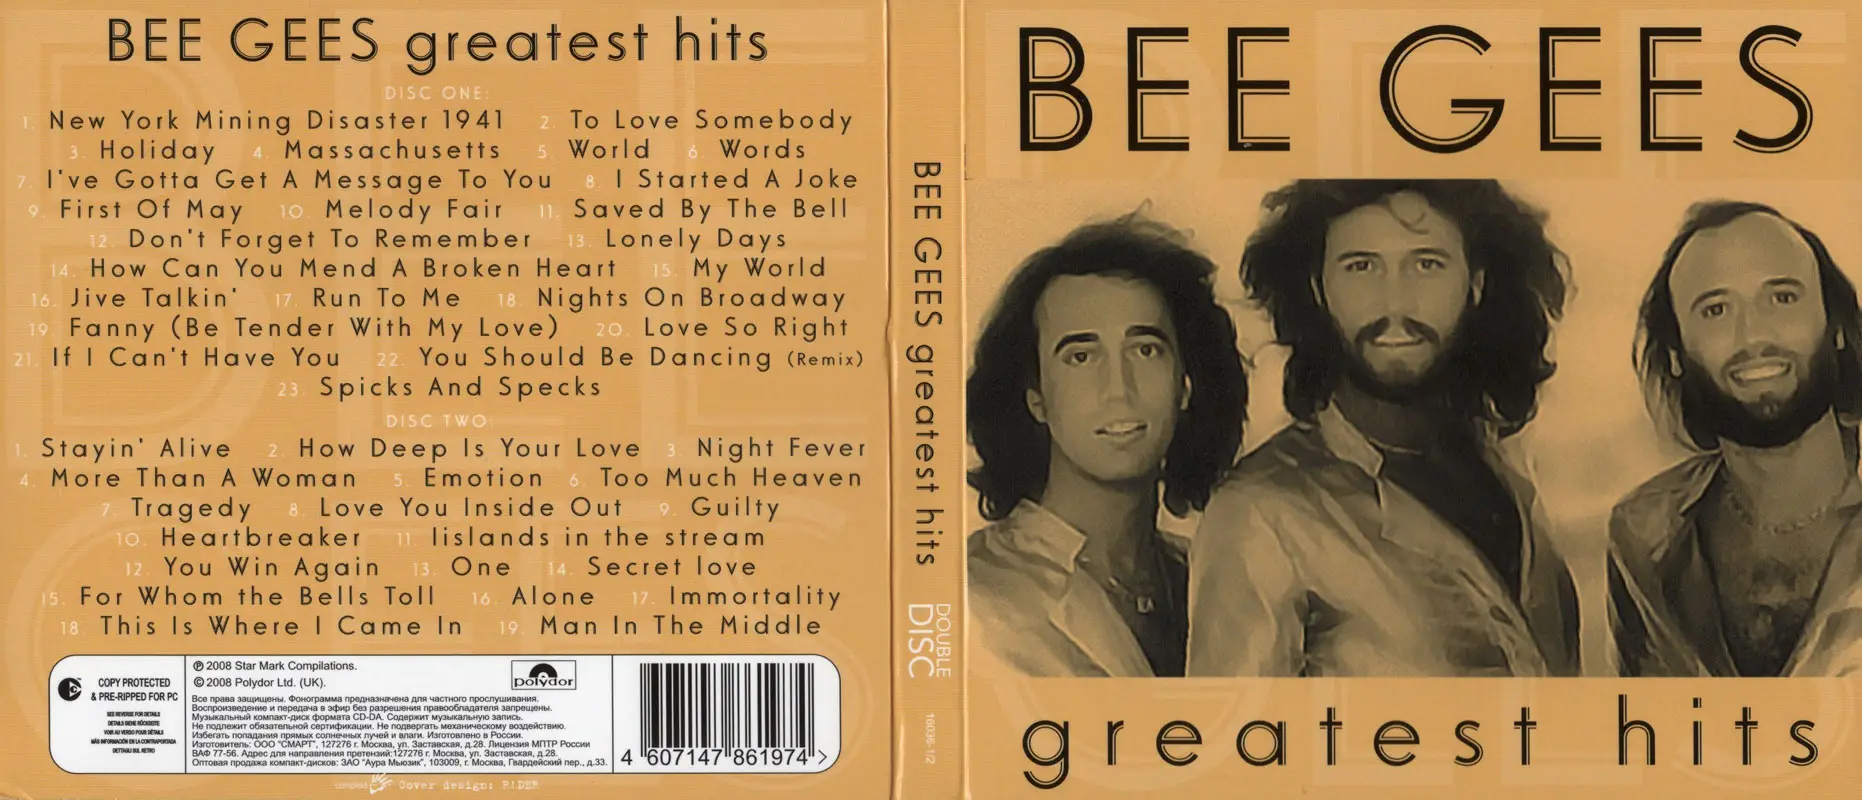 bee gees greatest hits album